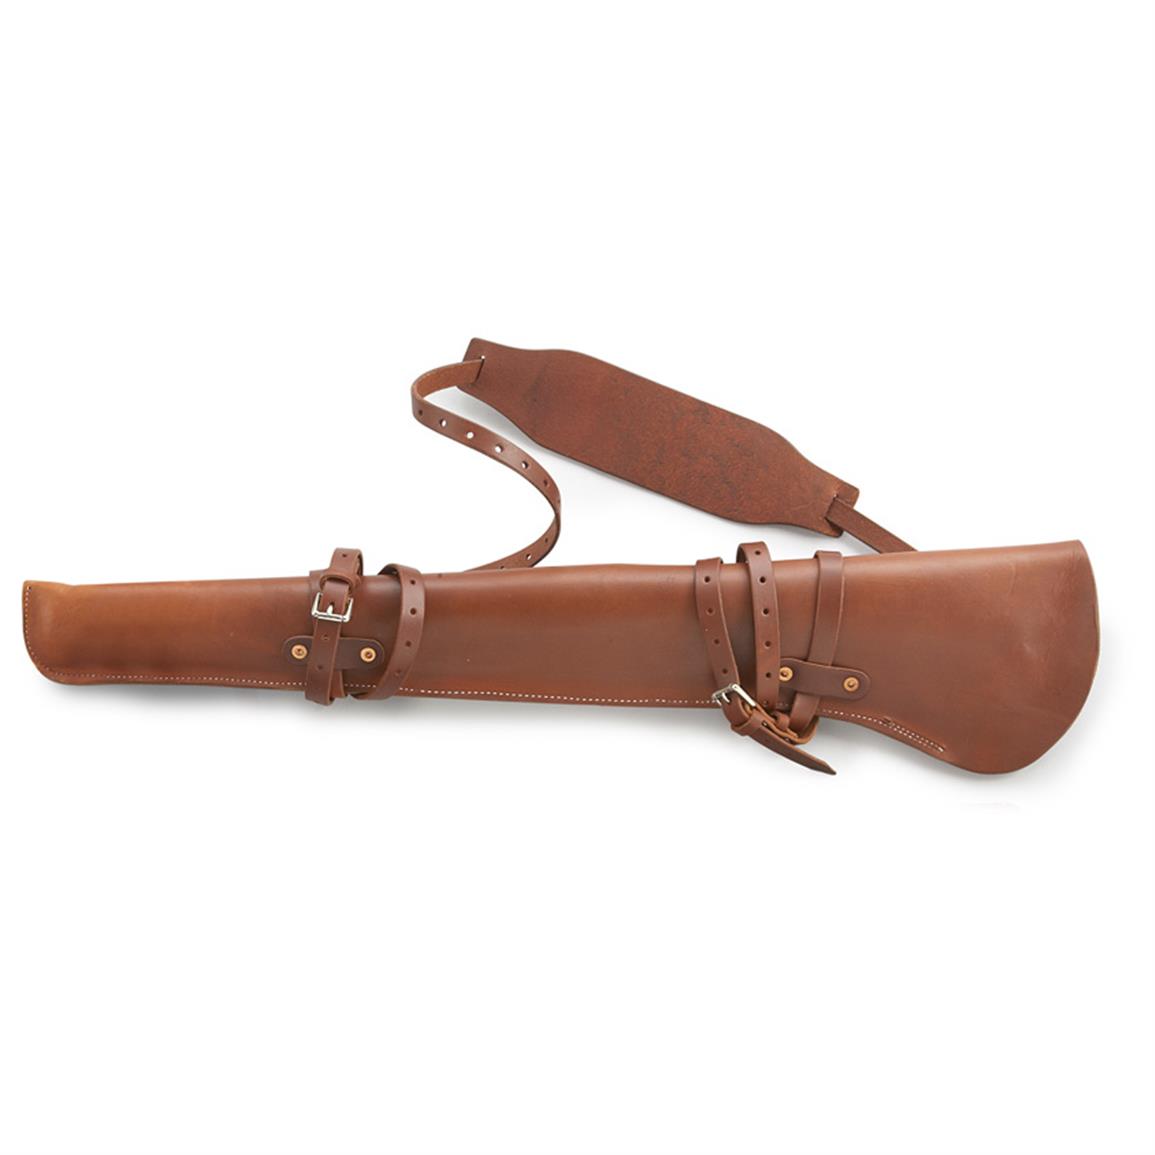 Leather Rifle Scabbard Gun Protection Hunting Firearm Carrying Transport Case 